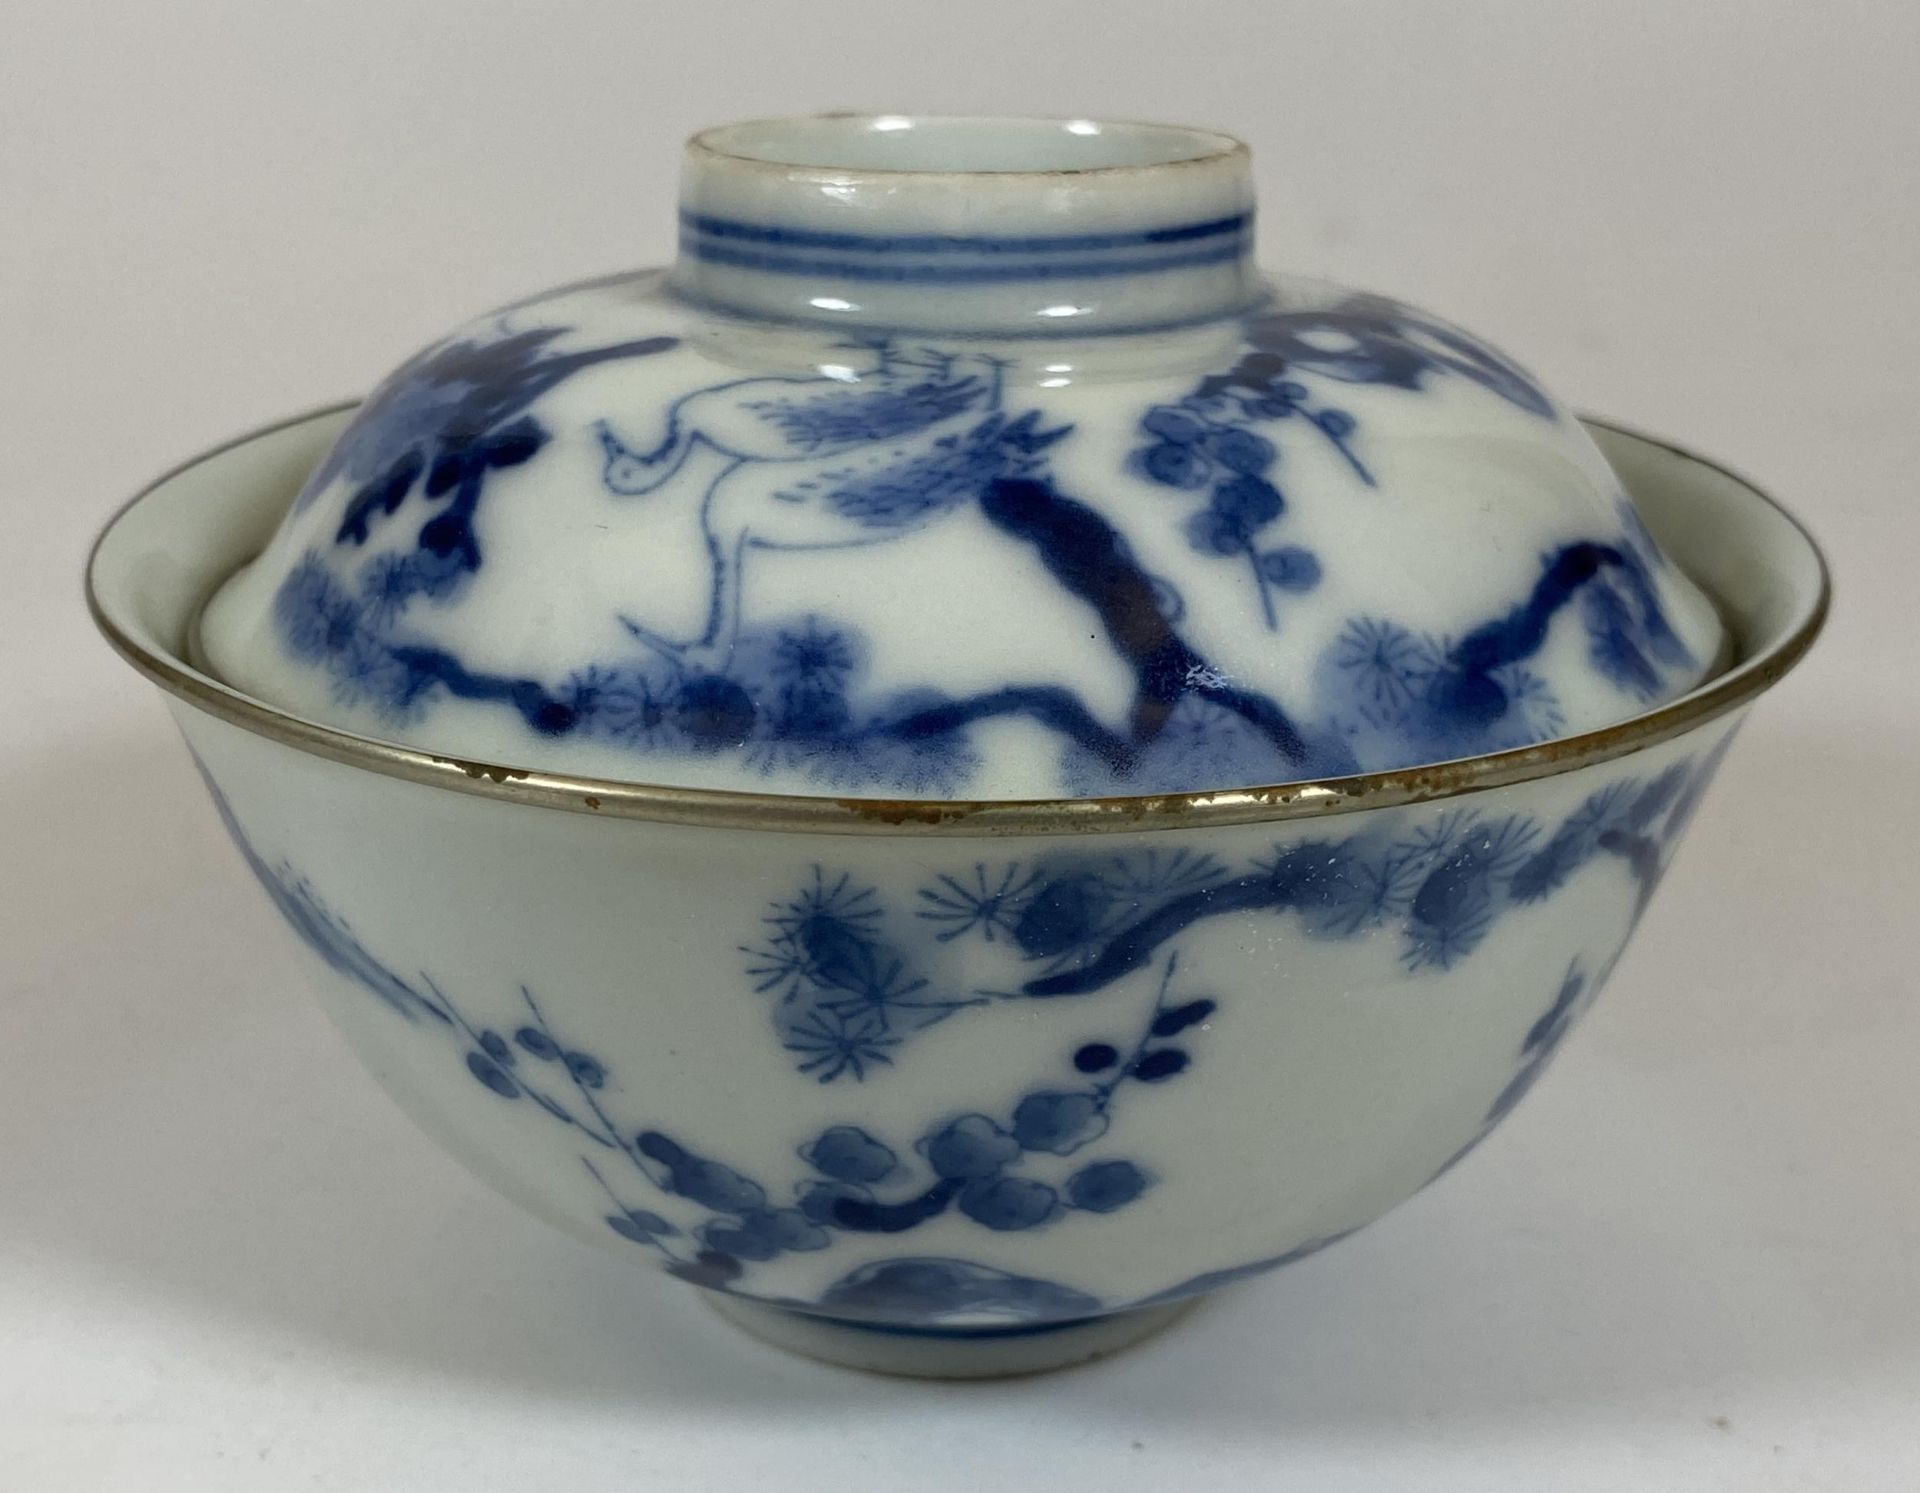 A CHINESE BLUE AND WHITE PORCELAIN TEA BOWL WITH SAUCER LID, HEIGHT 9CM